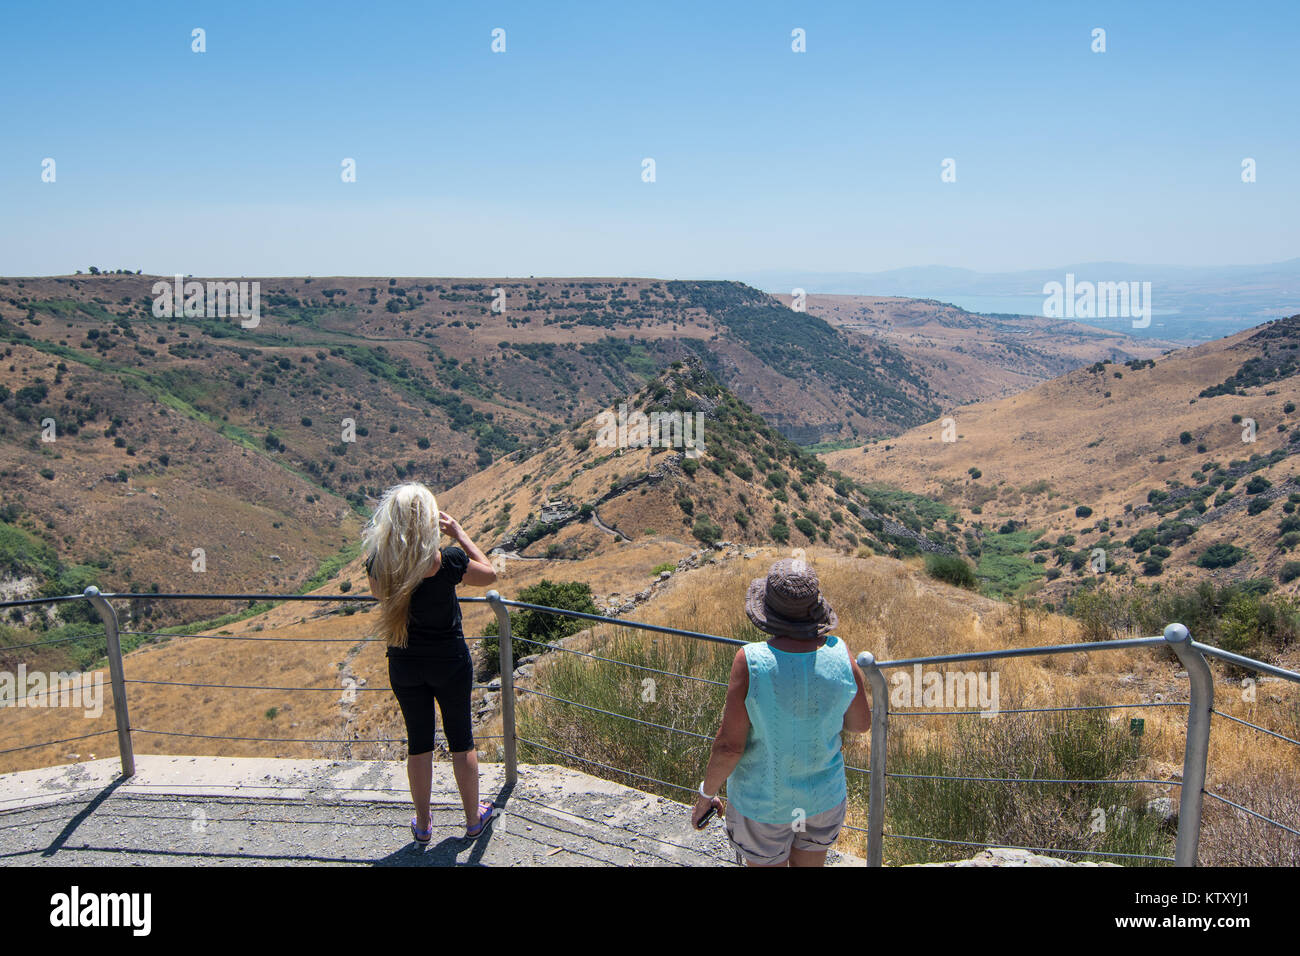 Two people taking pictures of the acropolis of ancient Gamla from the 'ancient trail' at the Gamla Nature Reserve at Northern Israel. Stock Photo